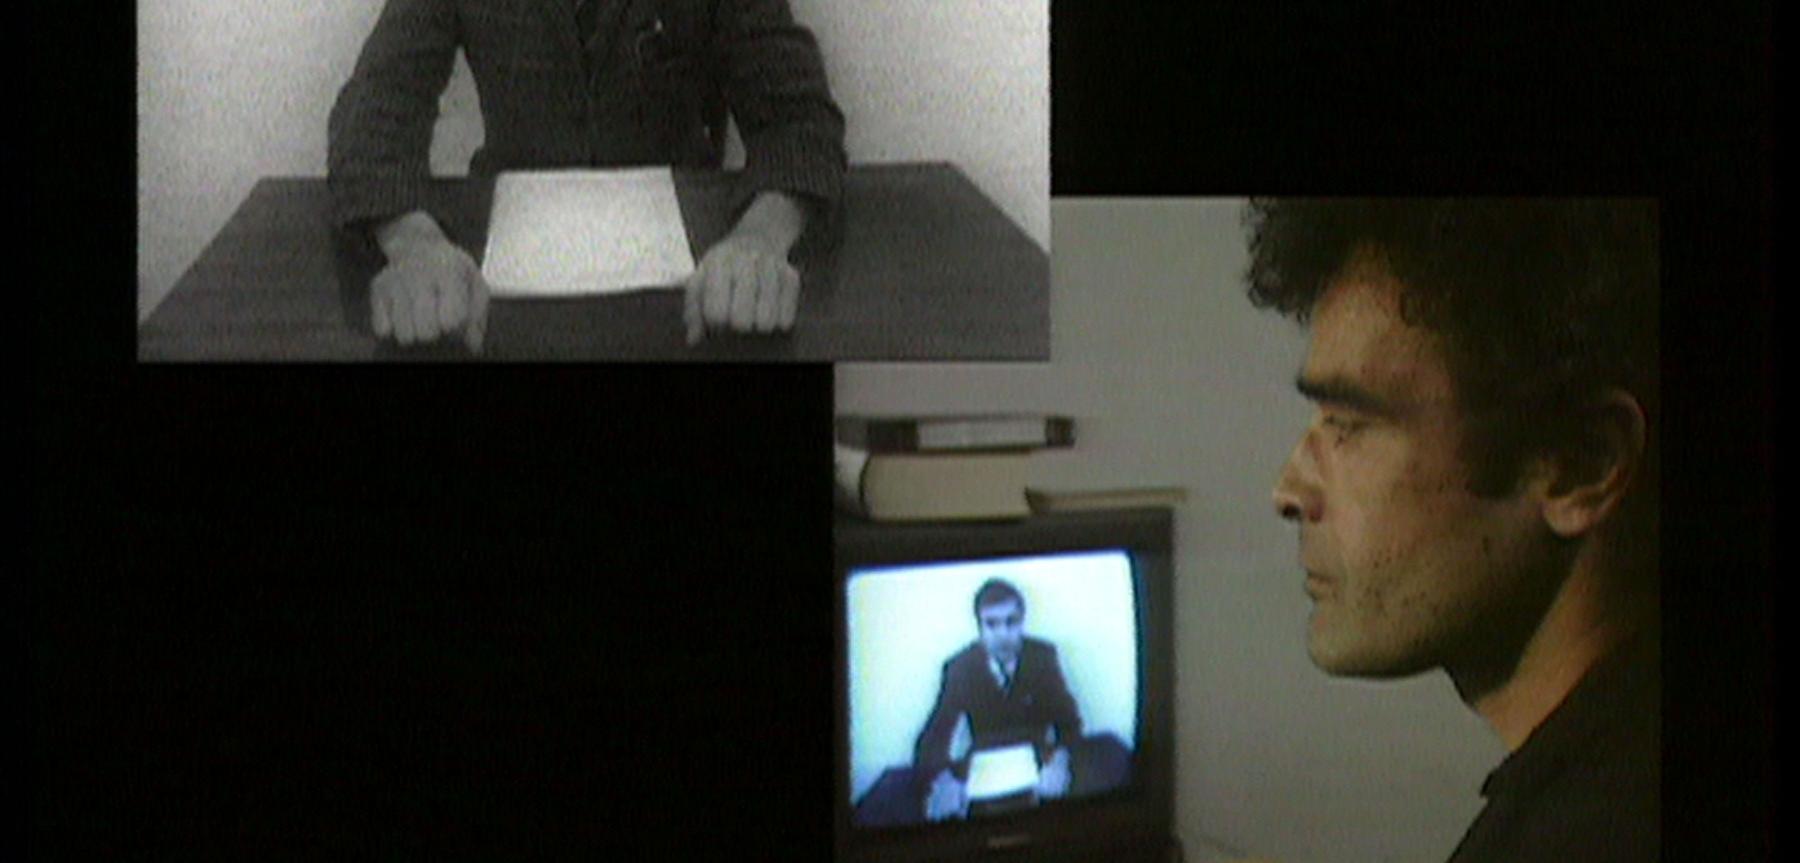 Still from a film showing two different men sitting at desks collaged together